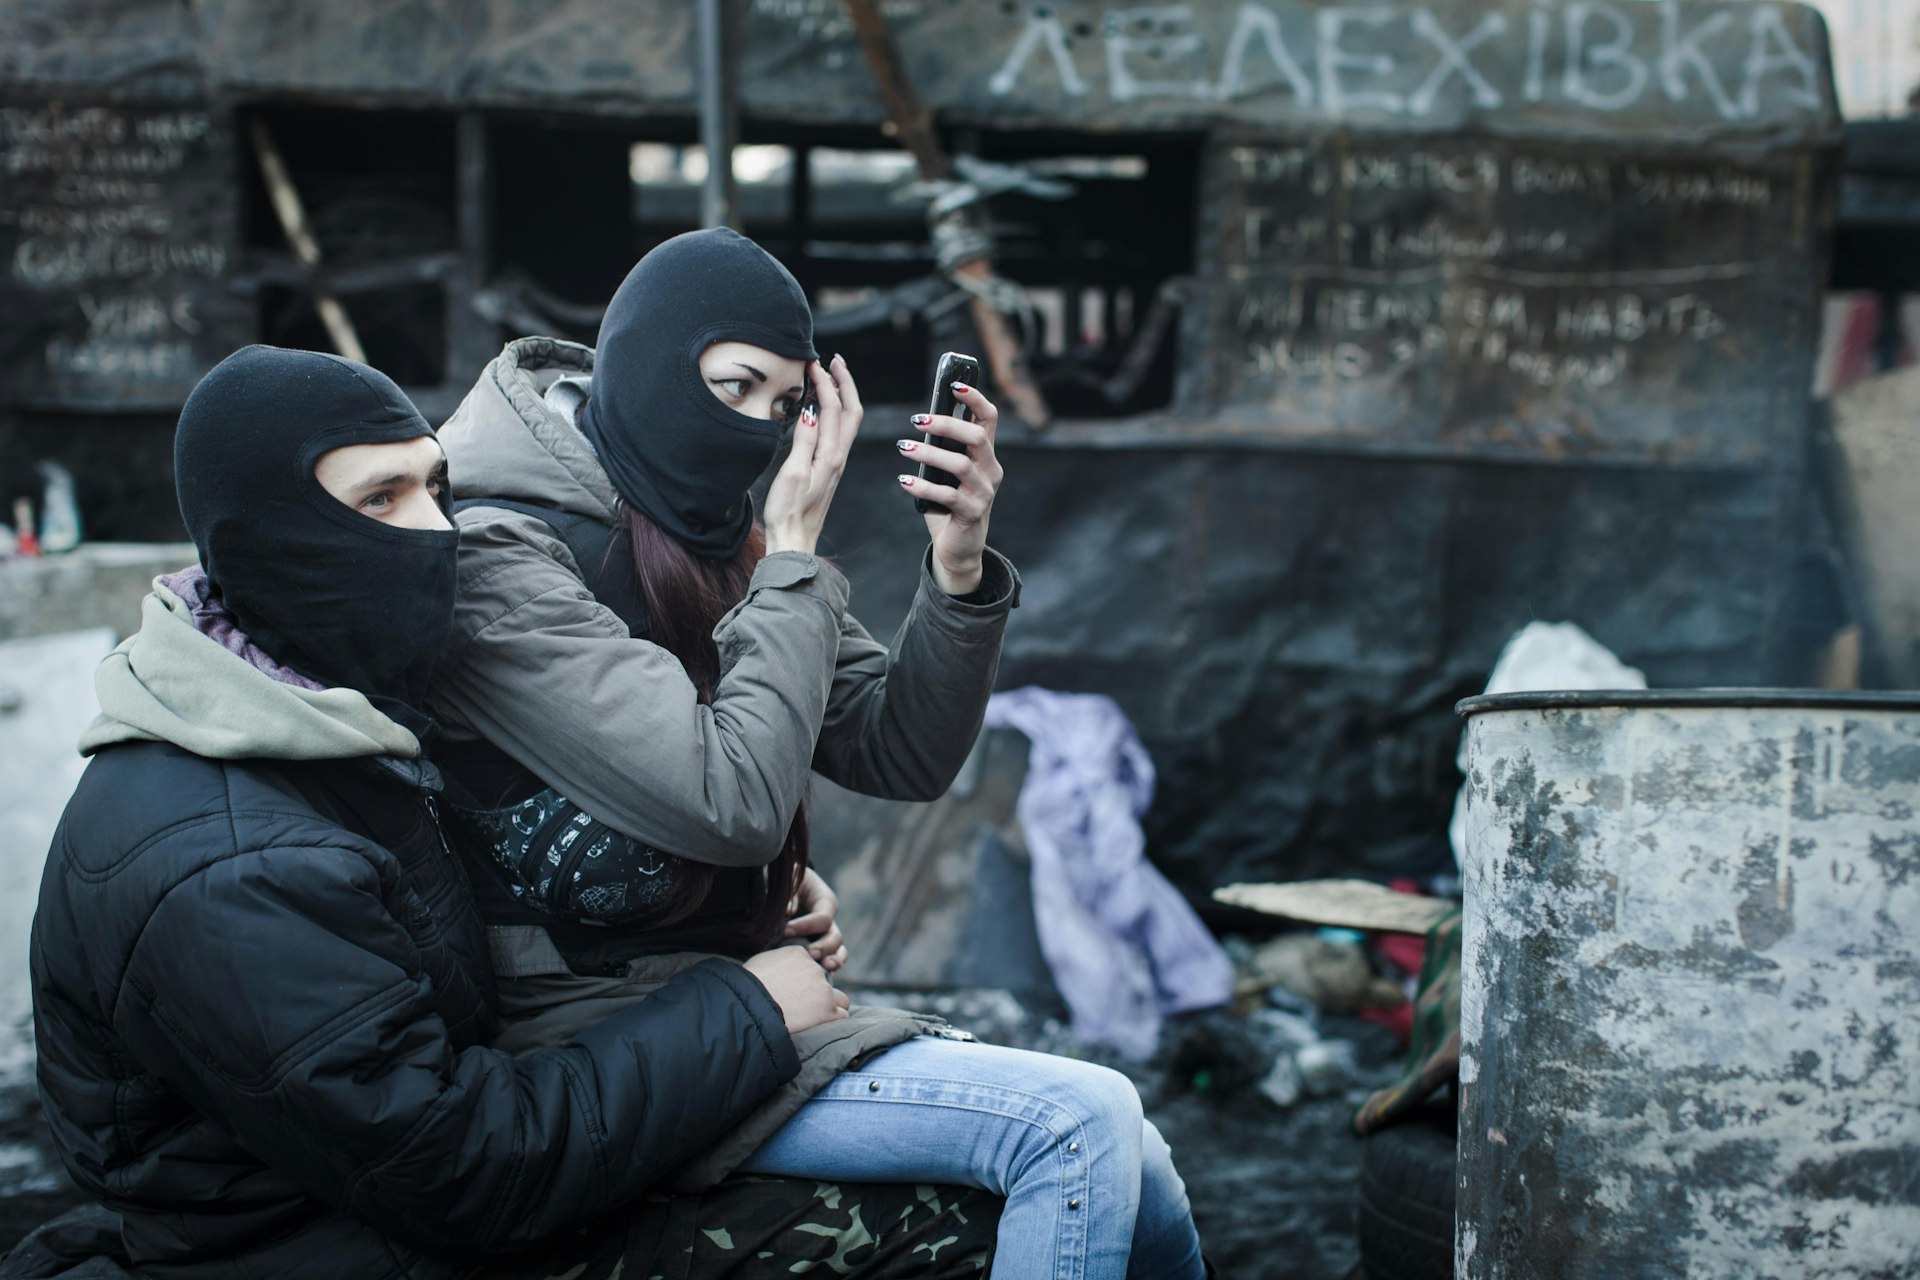 Ukraine in flux: A photographer digs beneath the surface